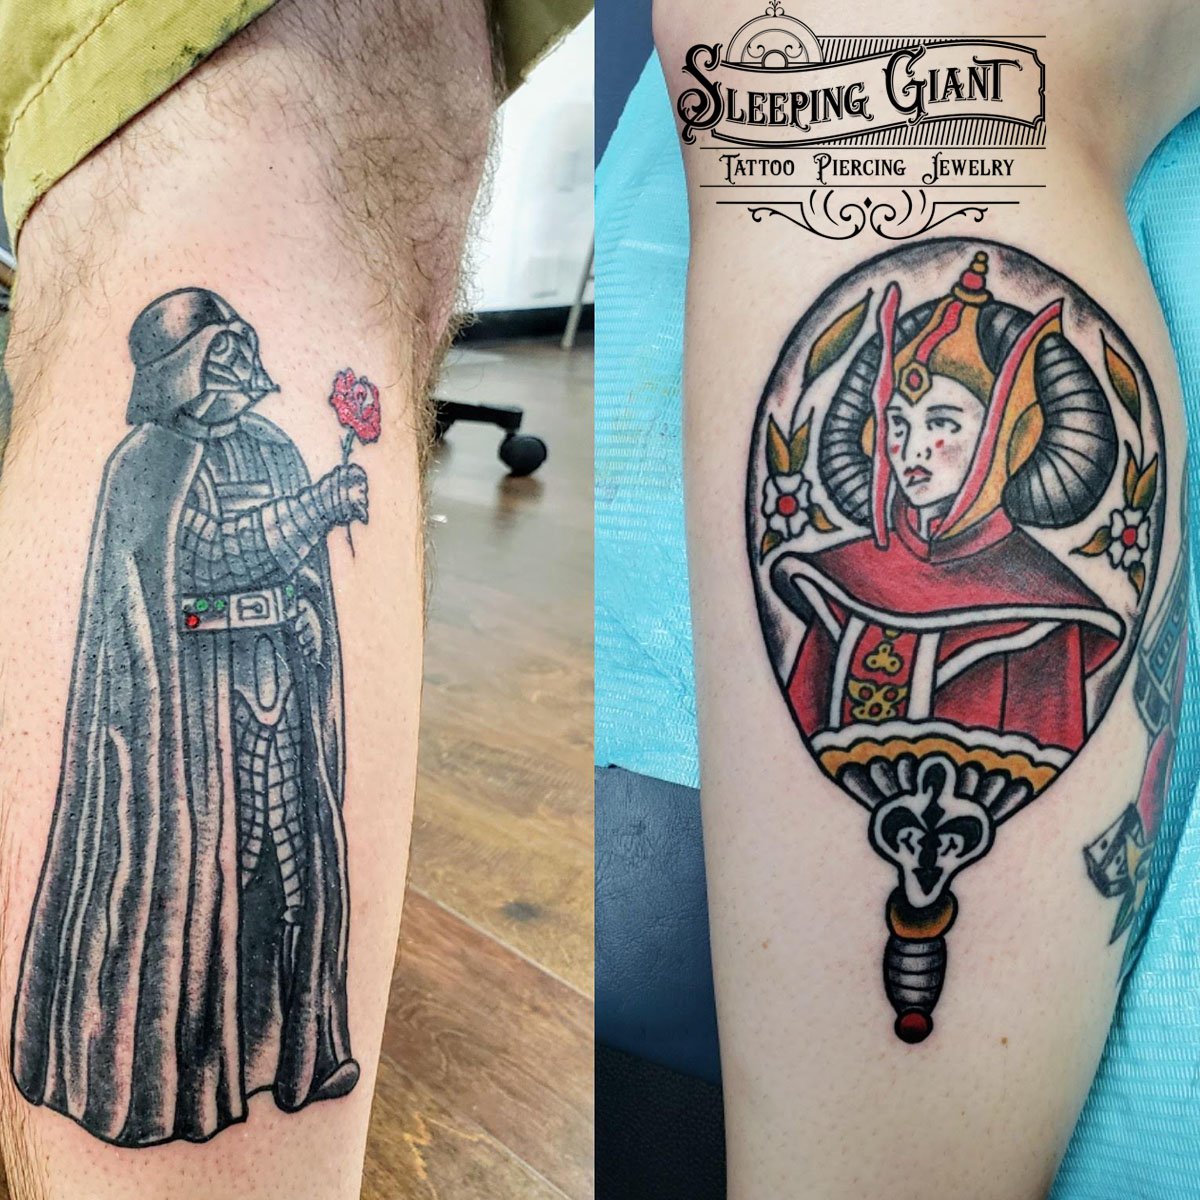 Star Wars Tattoos Celebrating the Empire  Tattoo Ideas Artists and Models